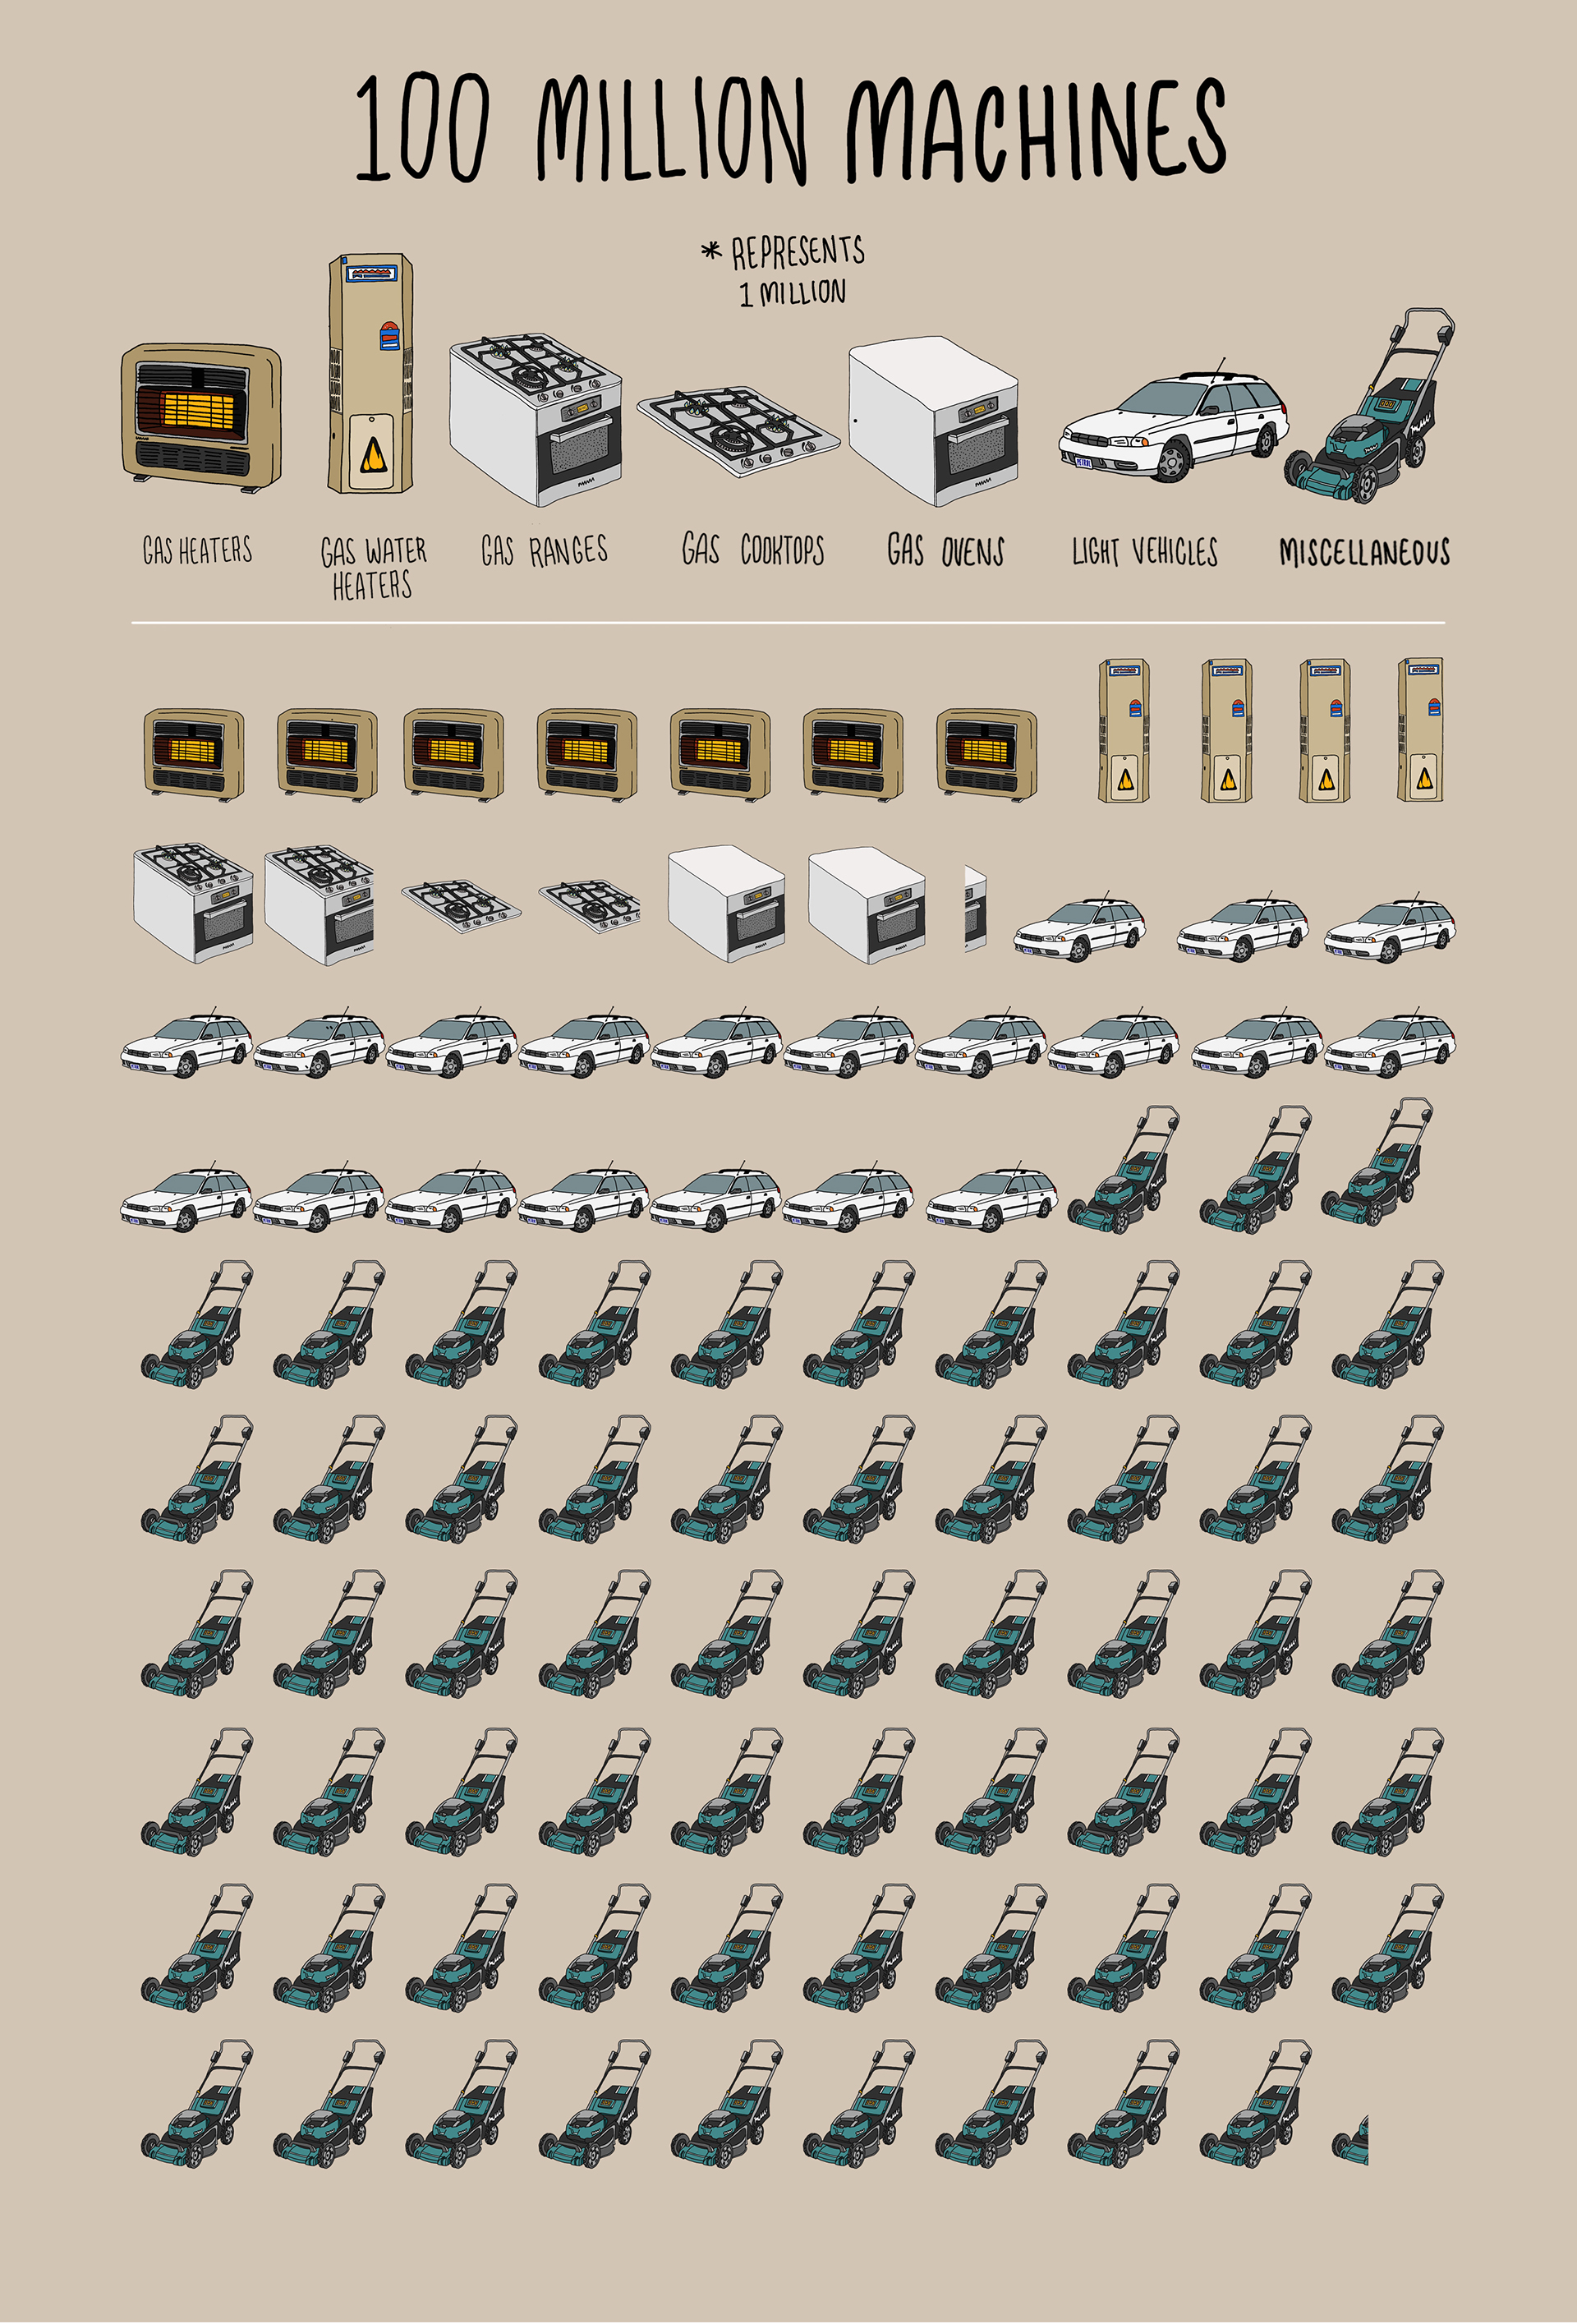 Grid showing gas water systems, cars, gas cooktops and ovens make up a large number of machines